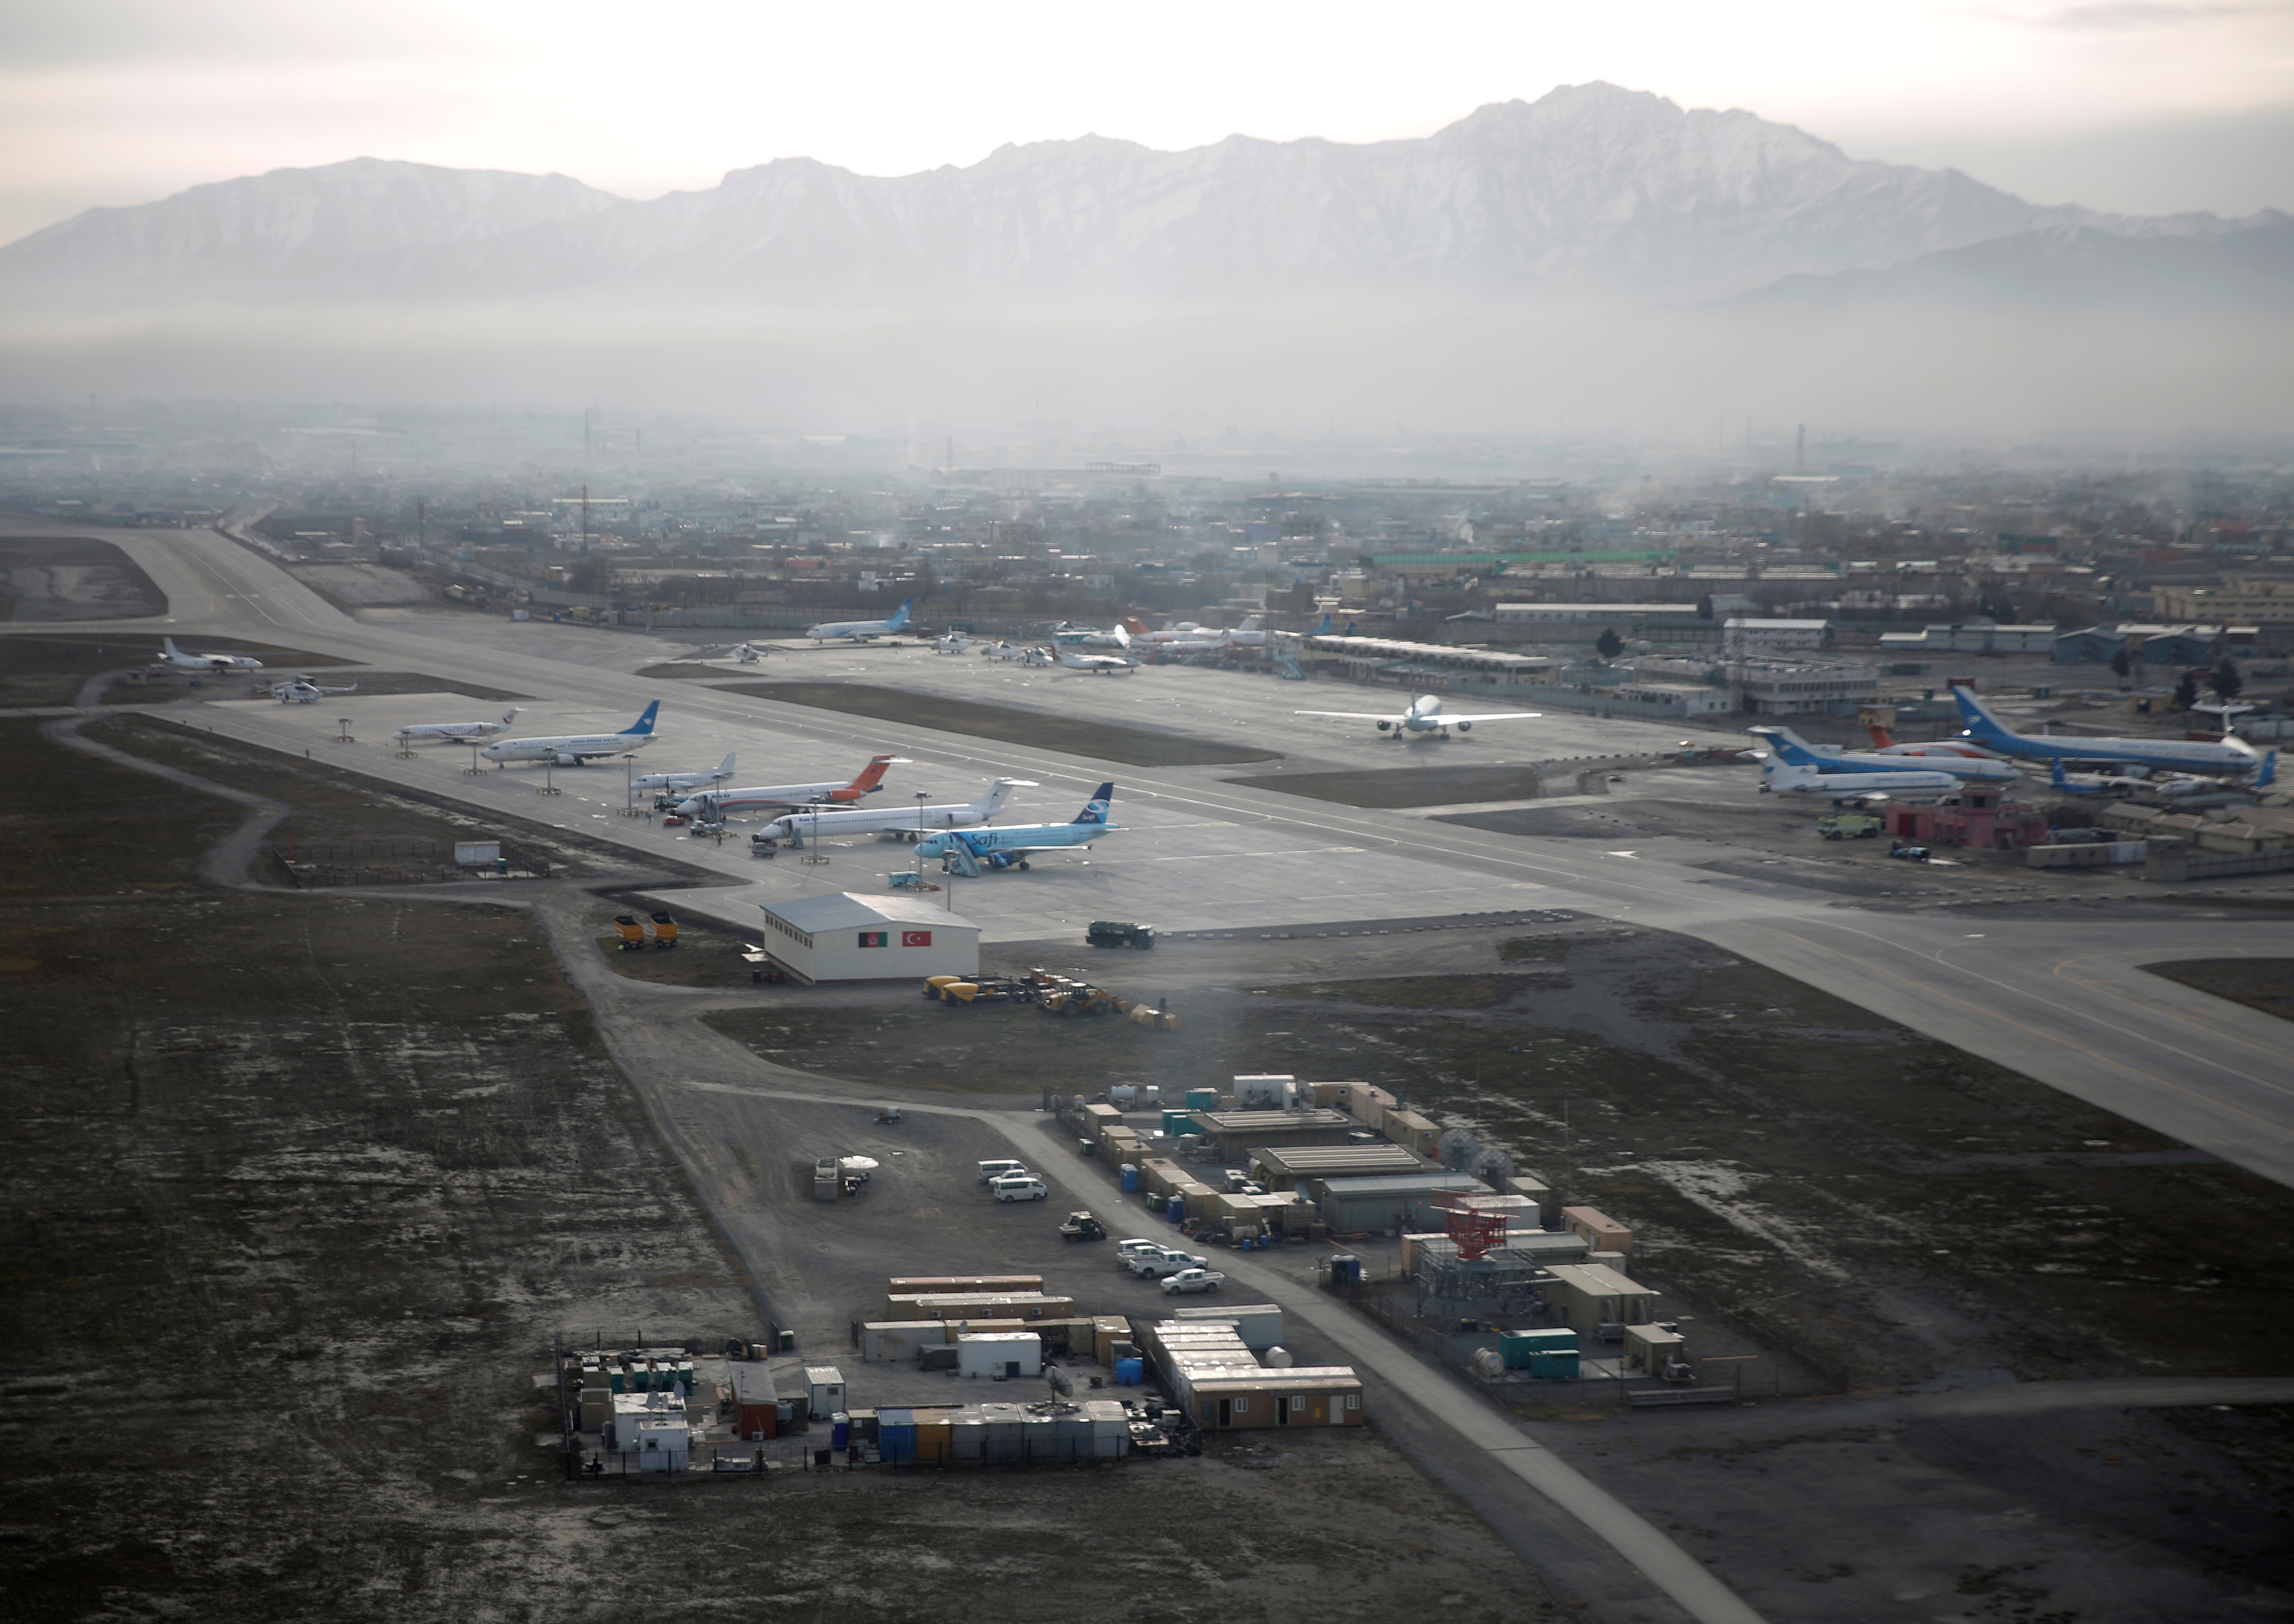 An aerial view of the Hamid Karzai International Airport in Kabul, previously known as Kabul International Airport, in Afghanistan, February 11, 2016. AfghanistanLM   REUTERS/Ahmad Masood